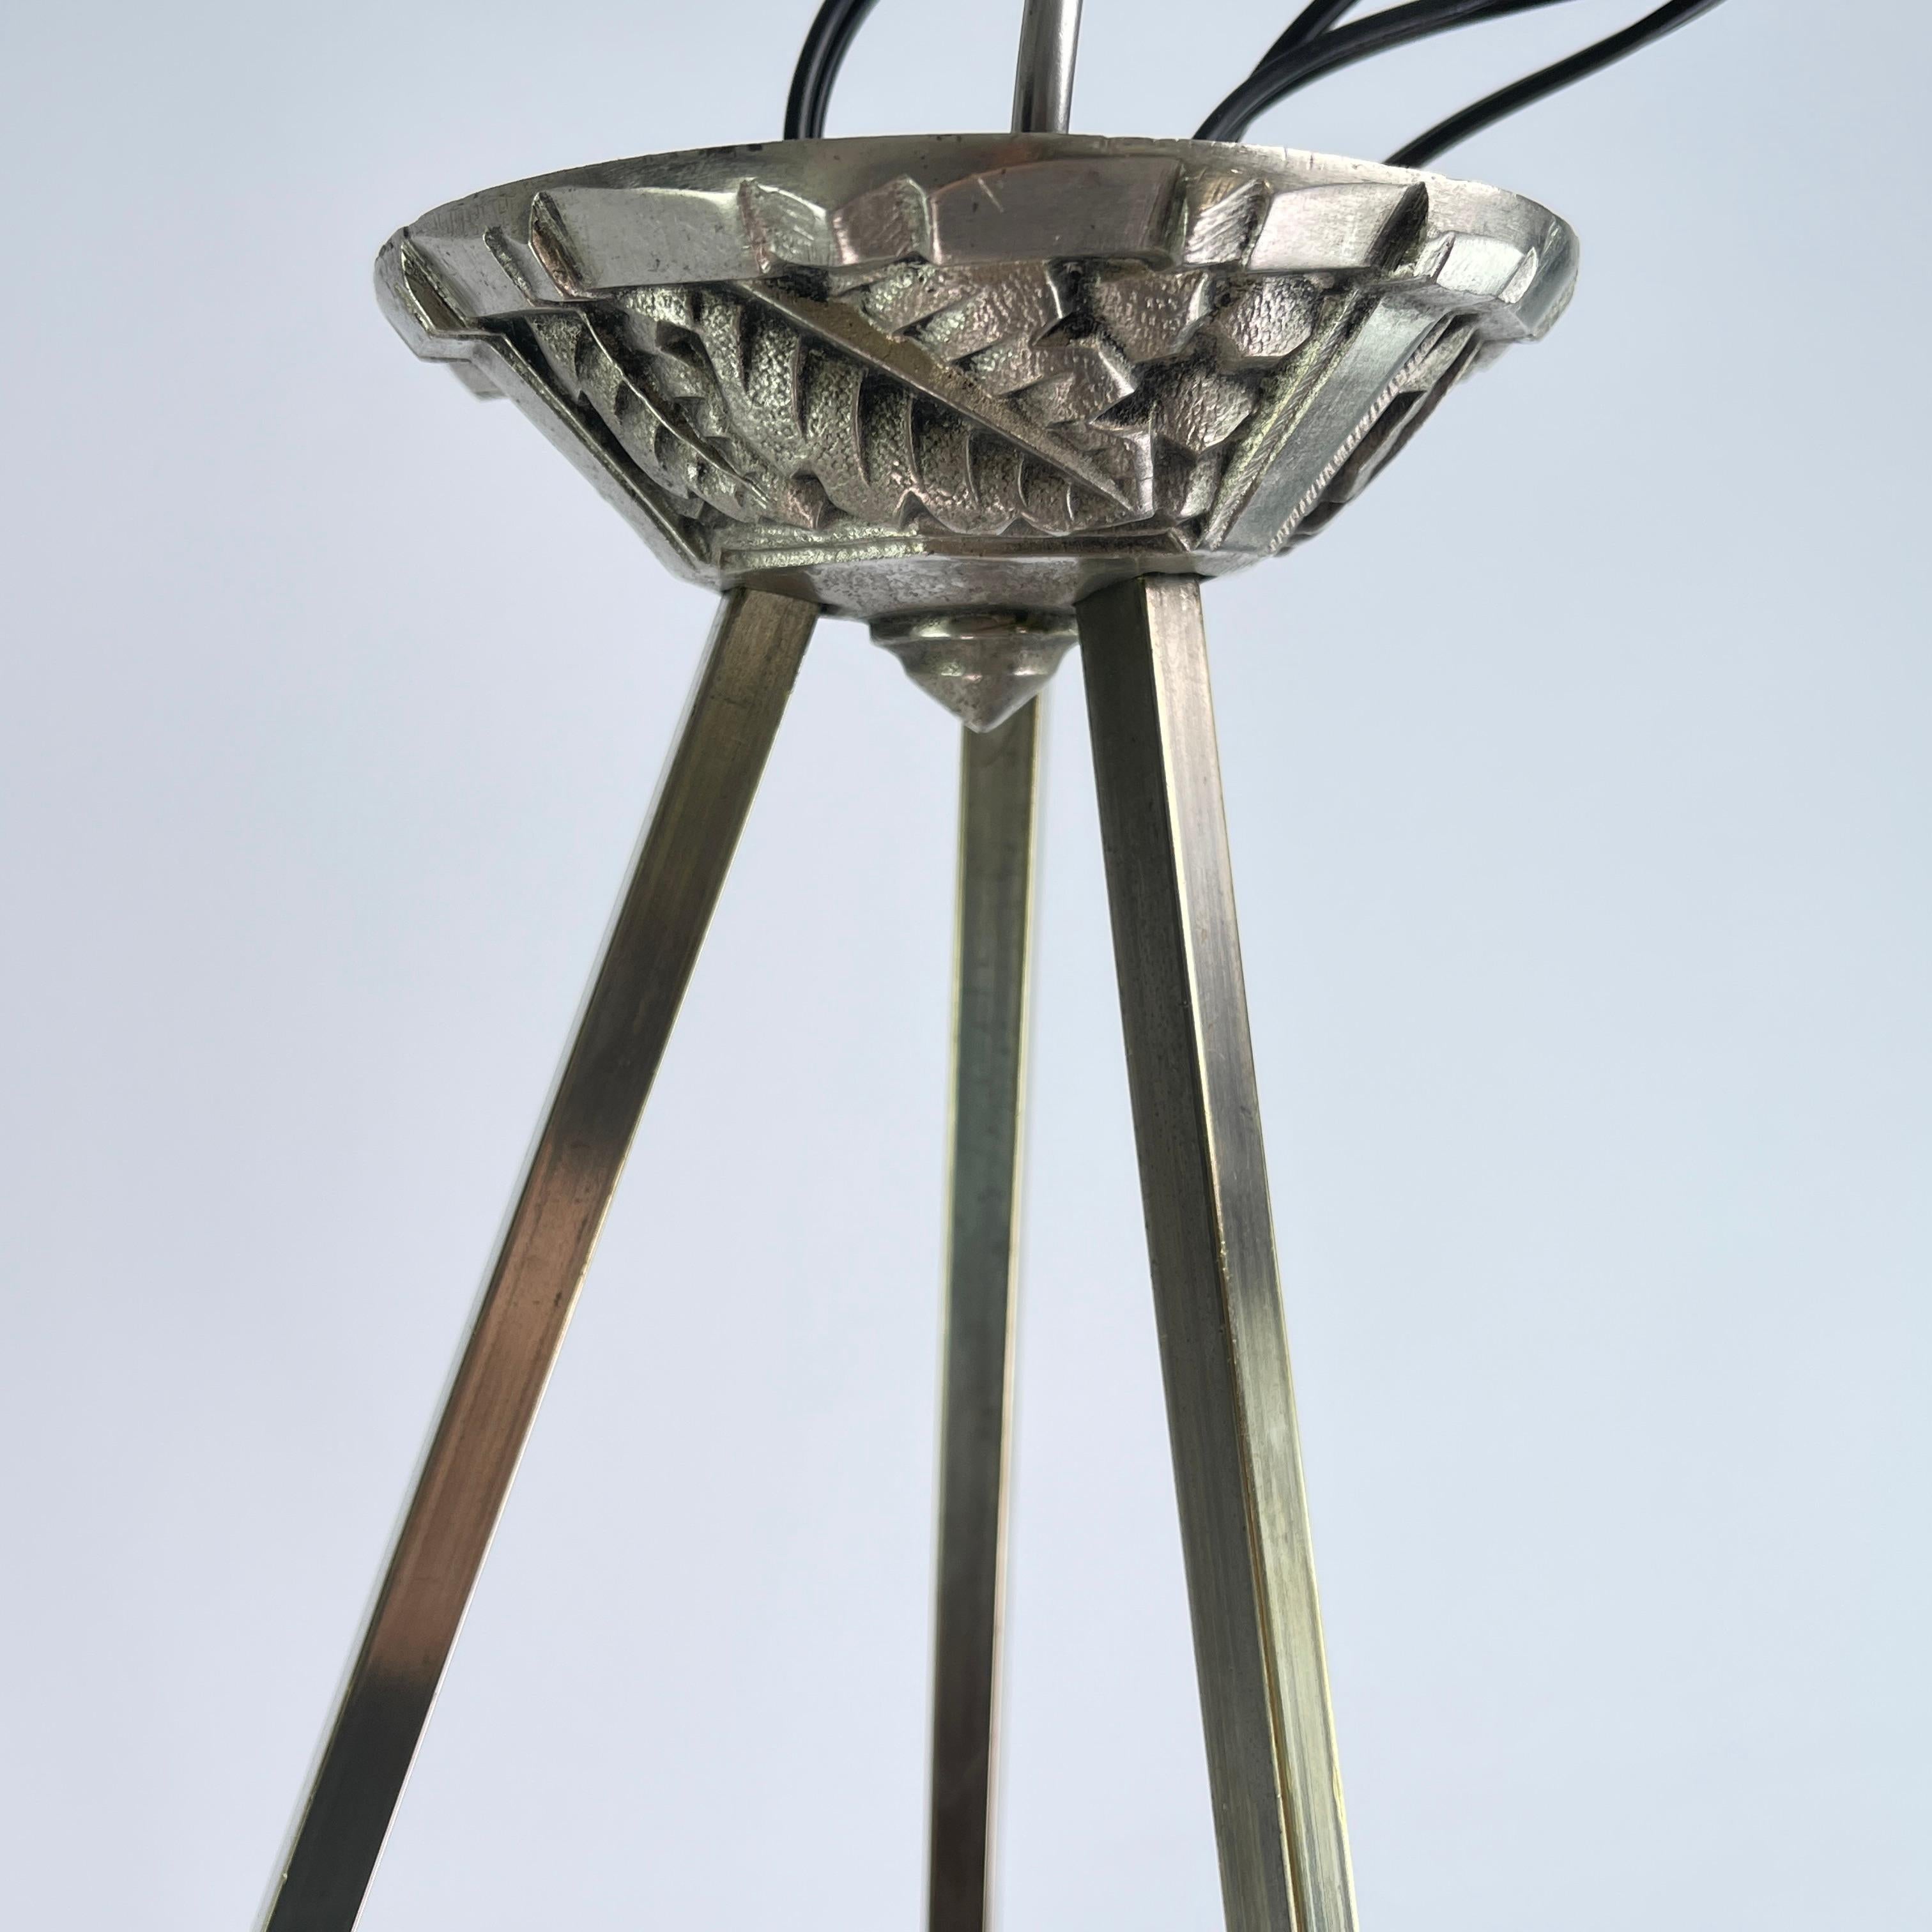 20th Century ART DECO Chandelier by P. Mayndiere, nickel-plated, 1930s